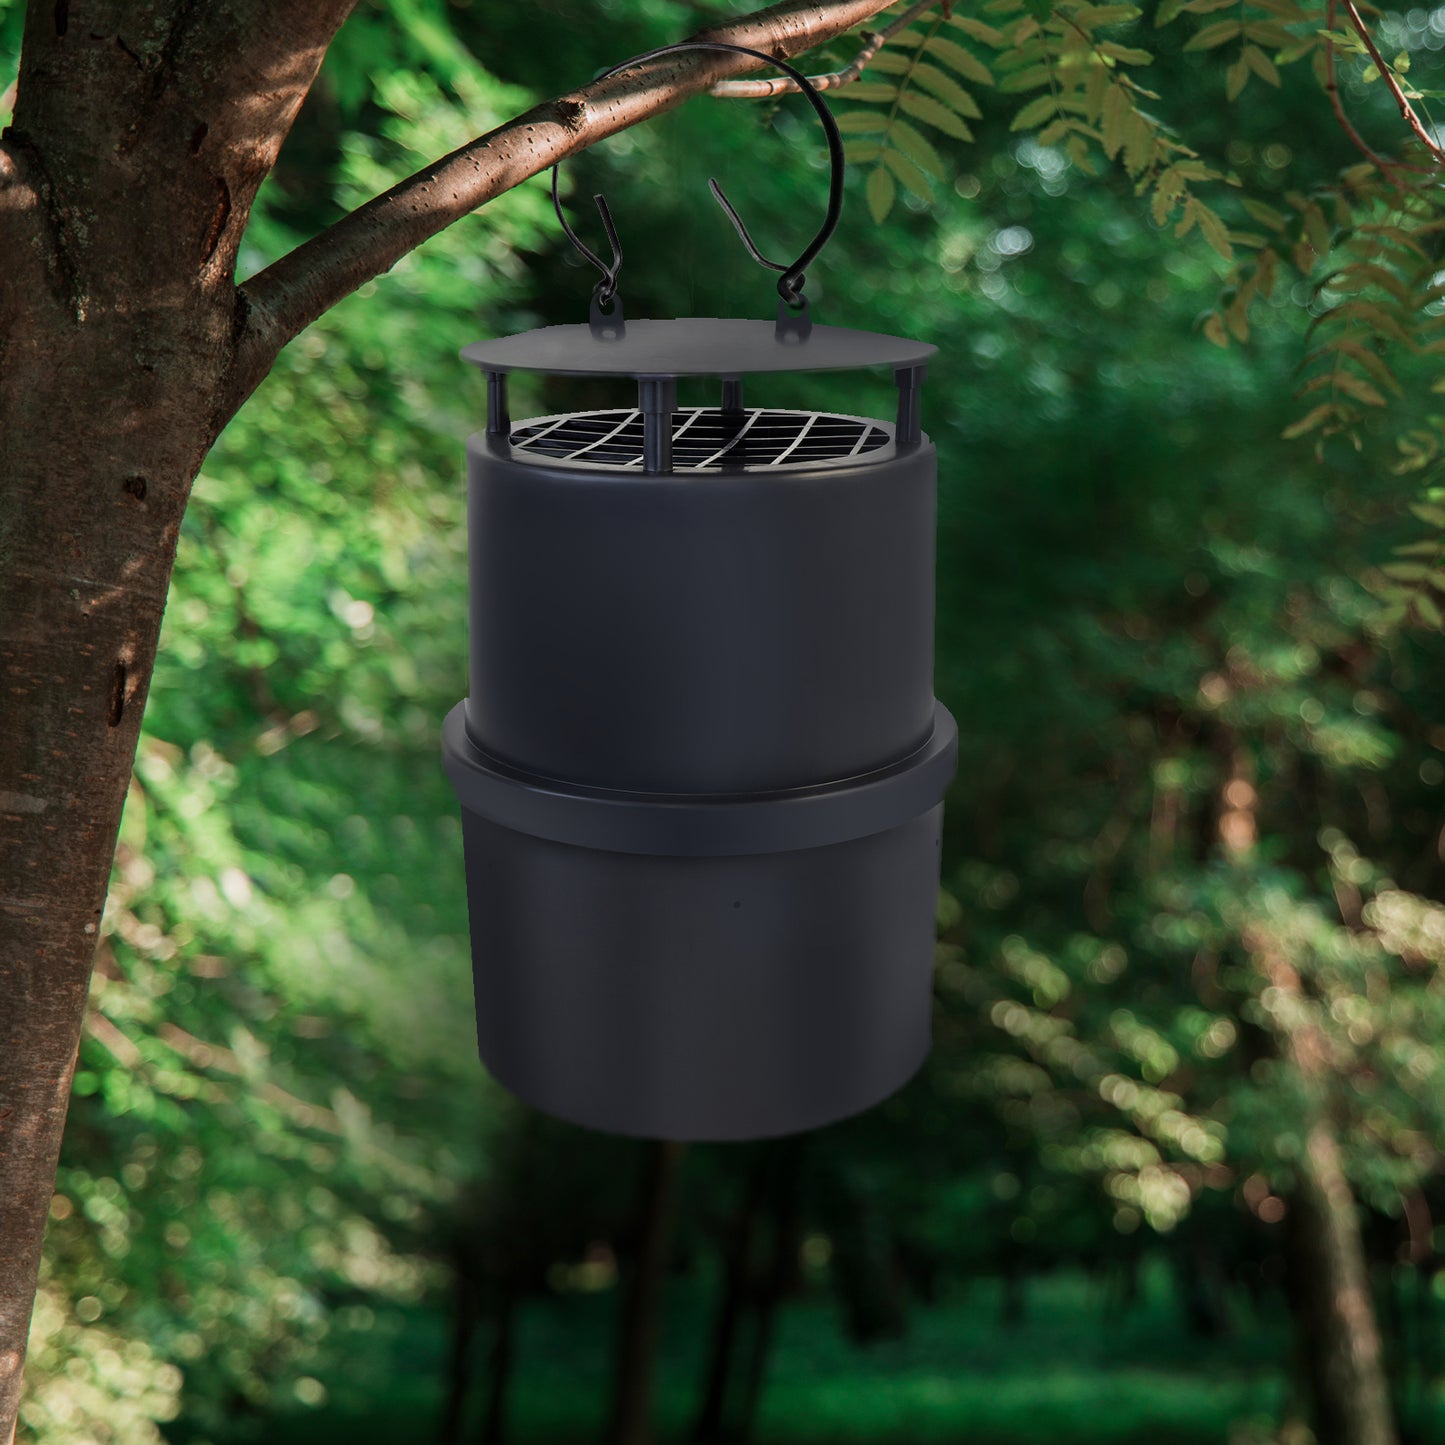 Oasis™ Mosquito & Flying Insect Trap